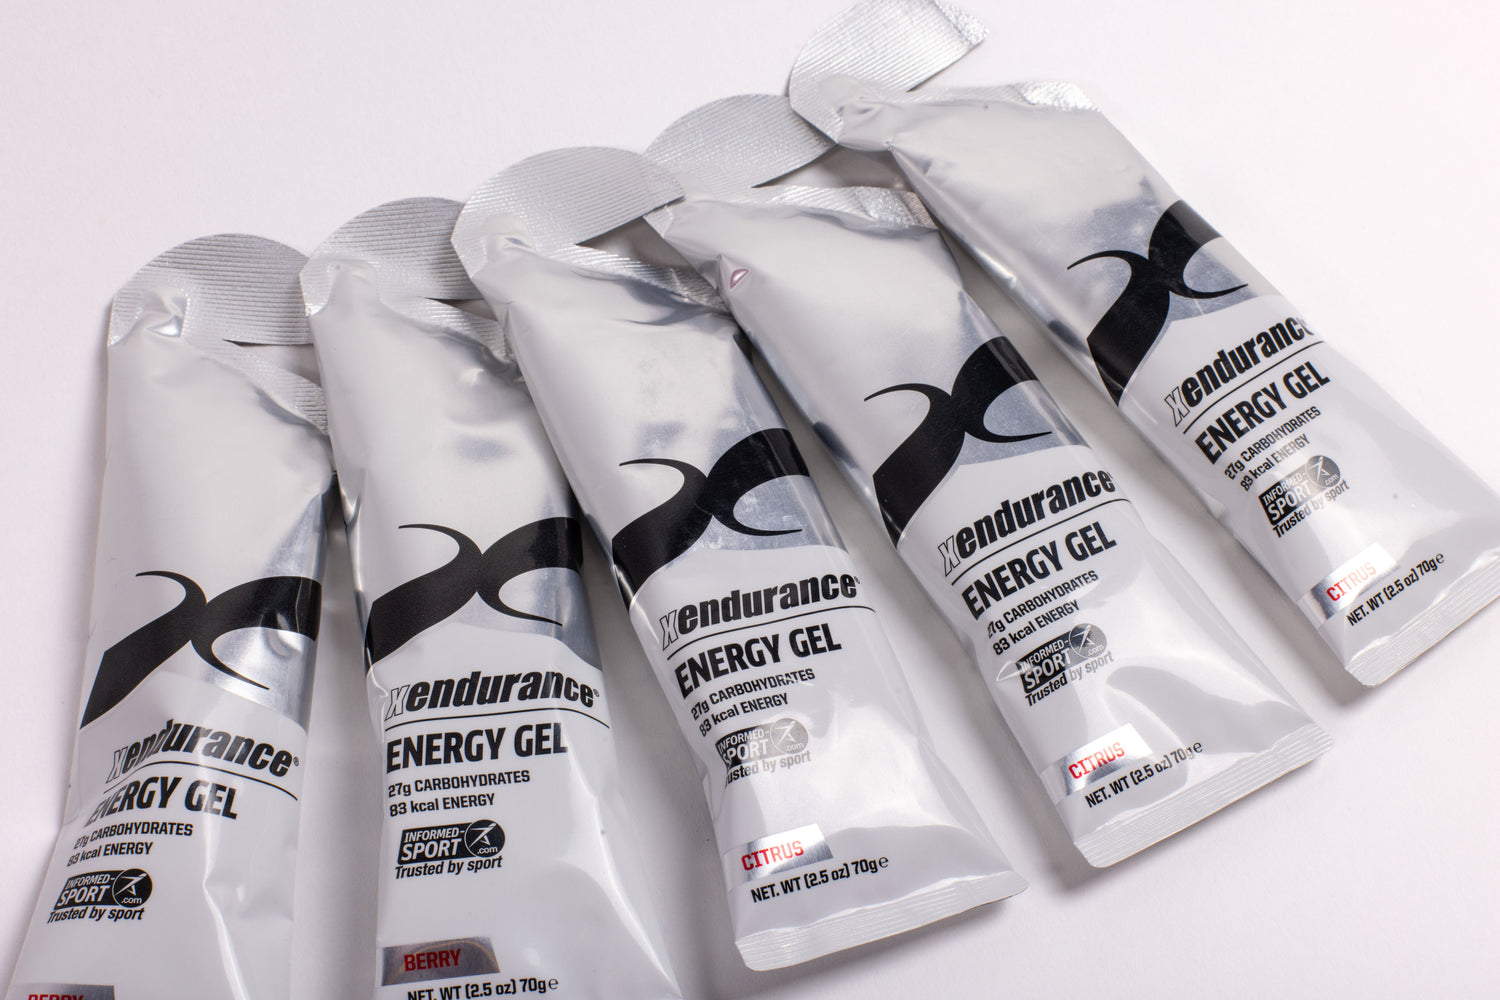 Why Use Energy Gels?